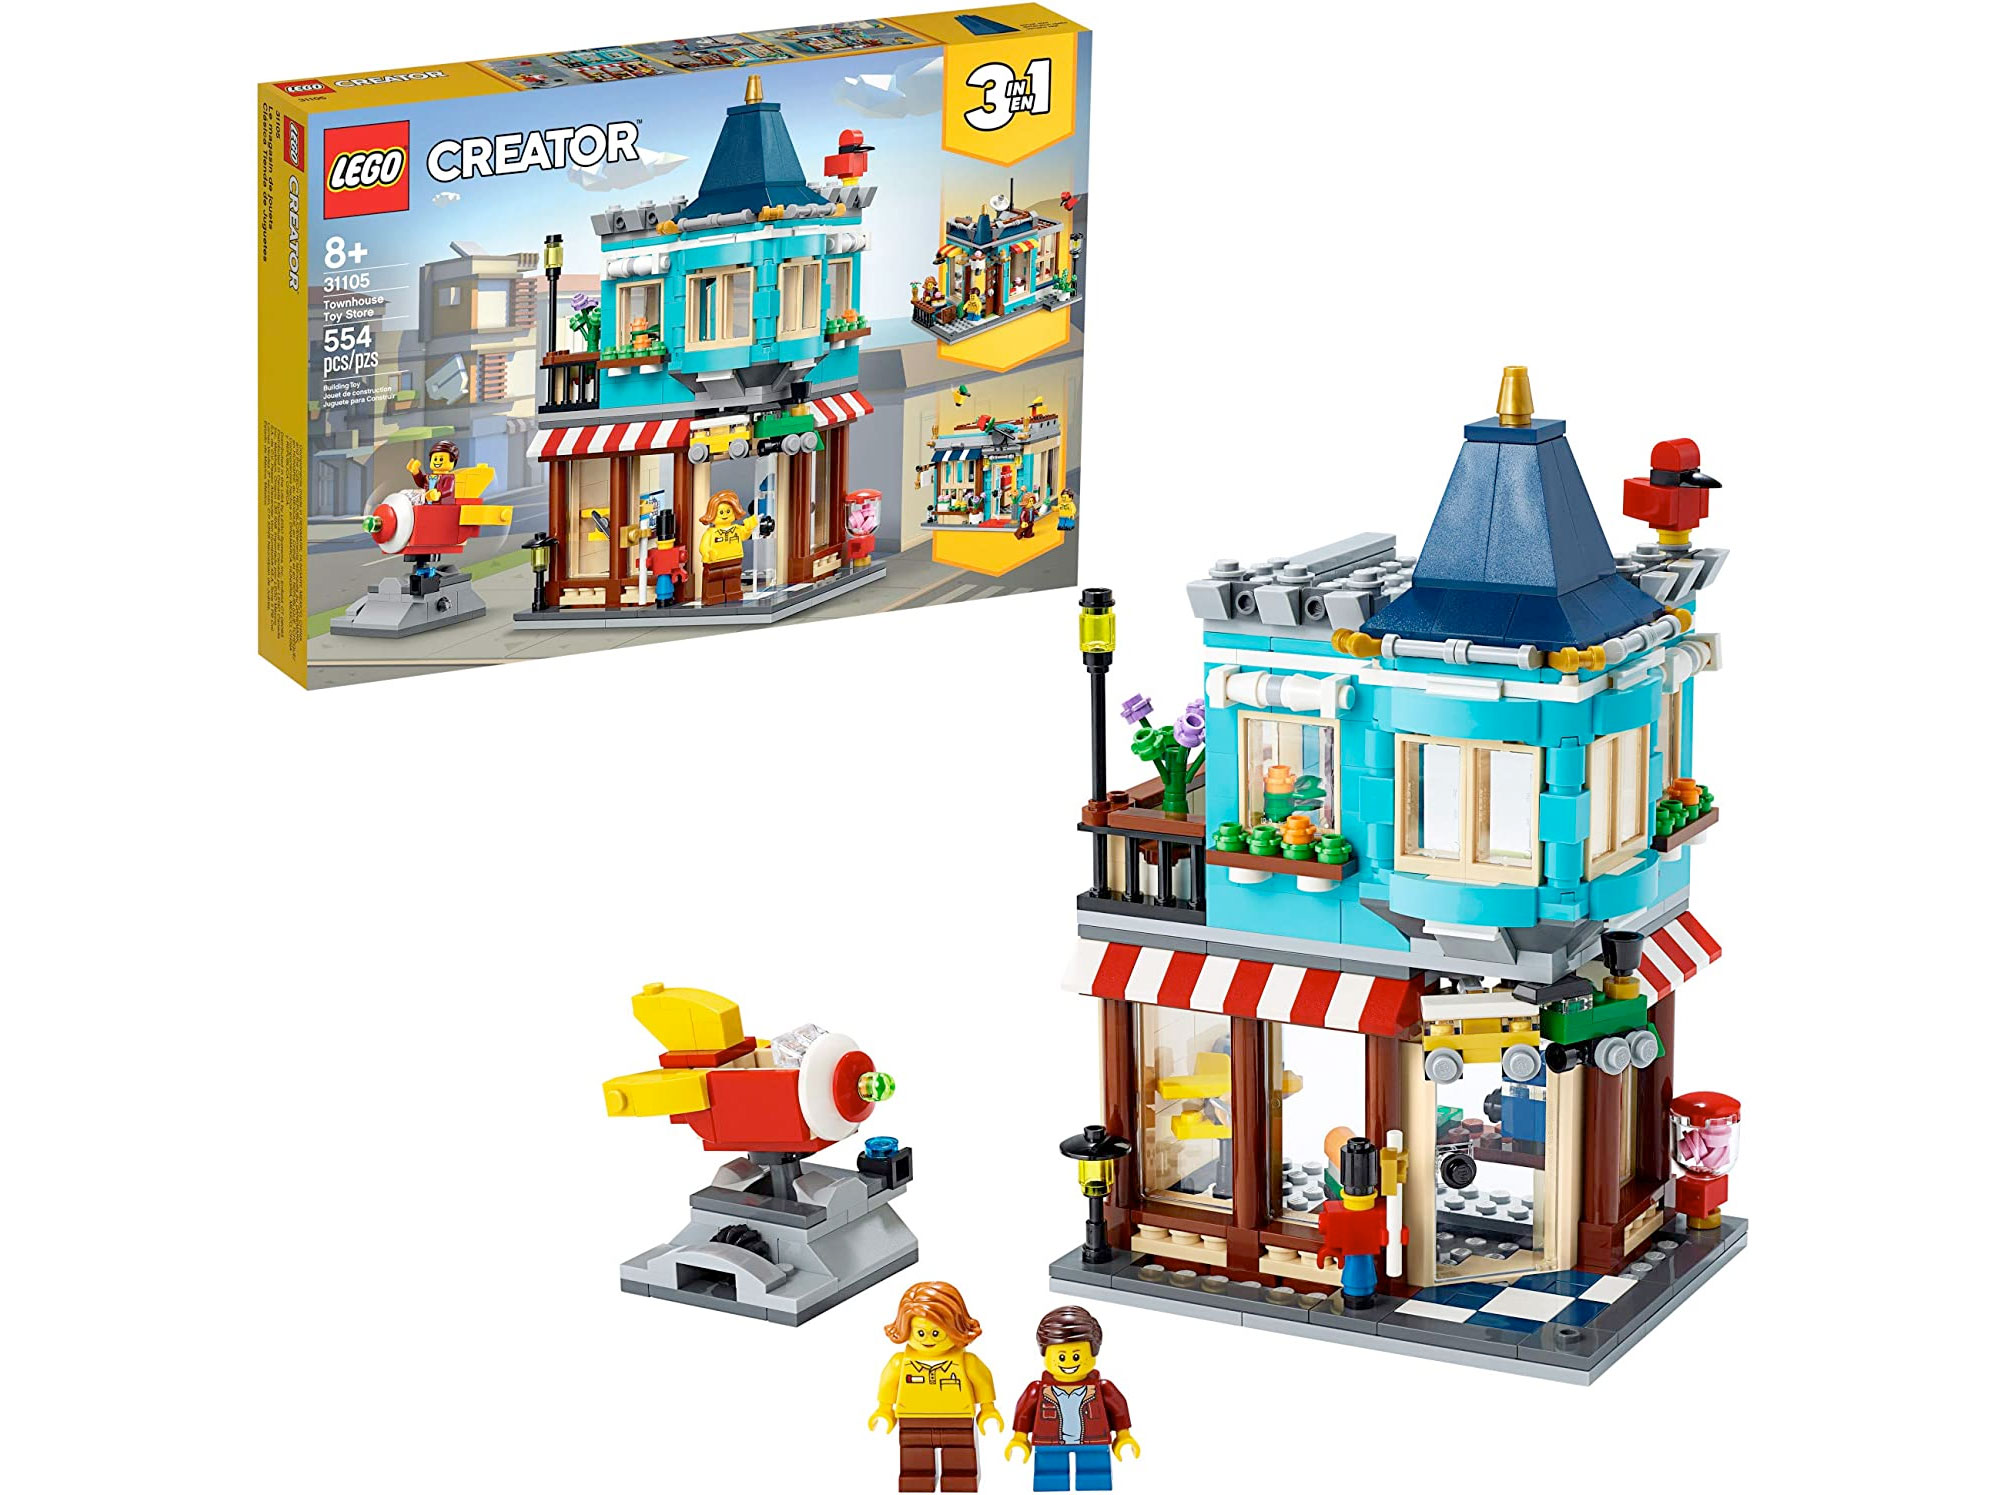 Amazon：LEGO Creator 3in1 Townhouse Toy Store 31105(554 pcs)只卖$39.99